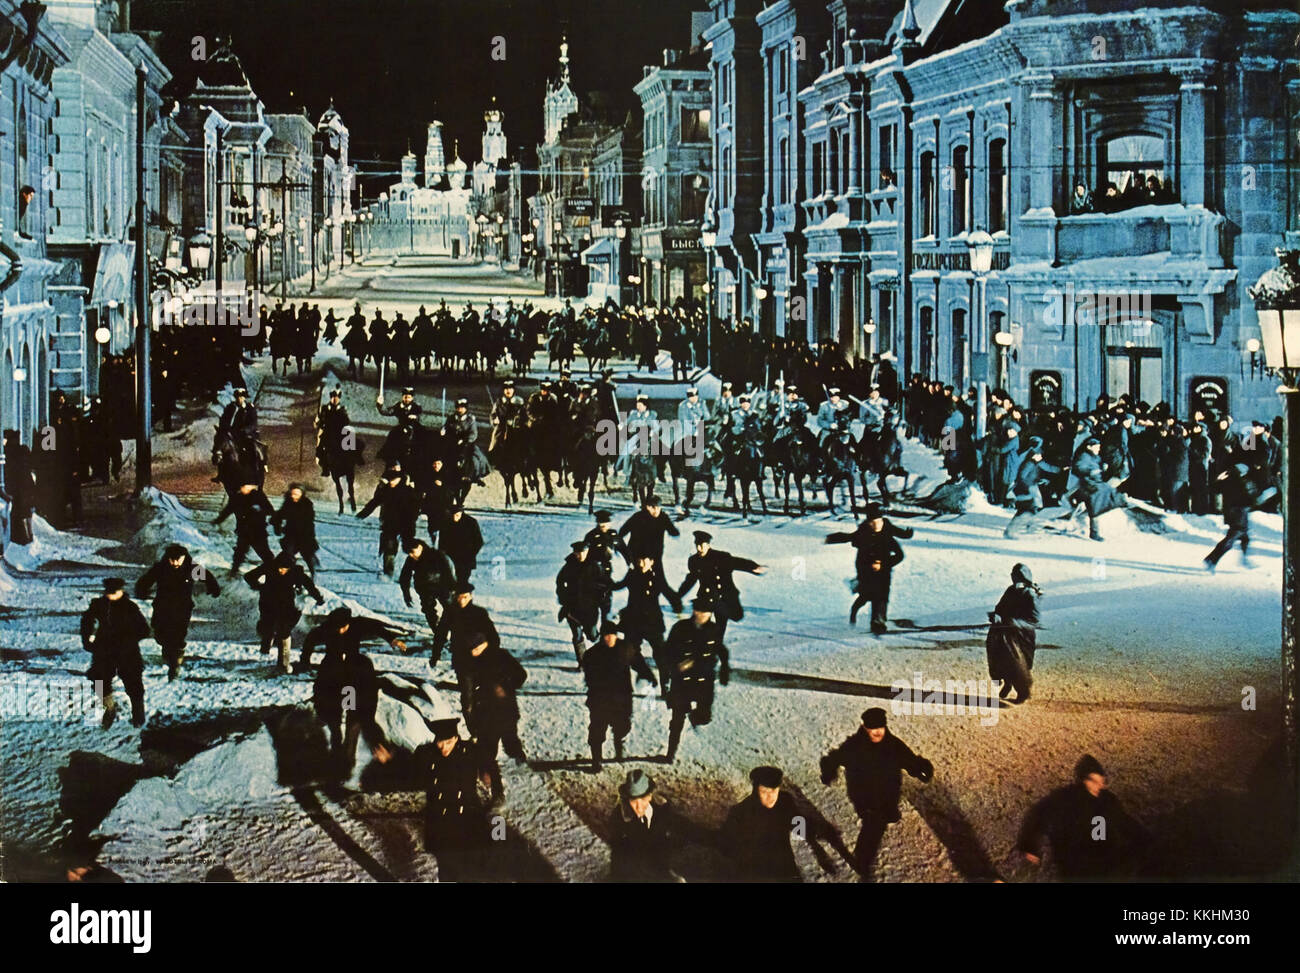 Doctor Zhivago (film)-The Cossacks attack a peaceful demonstration Stock Photo